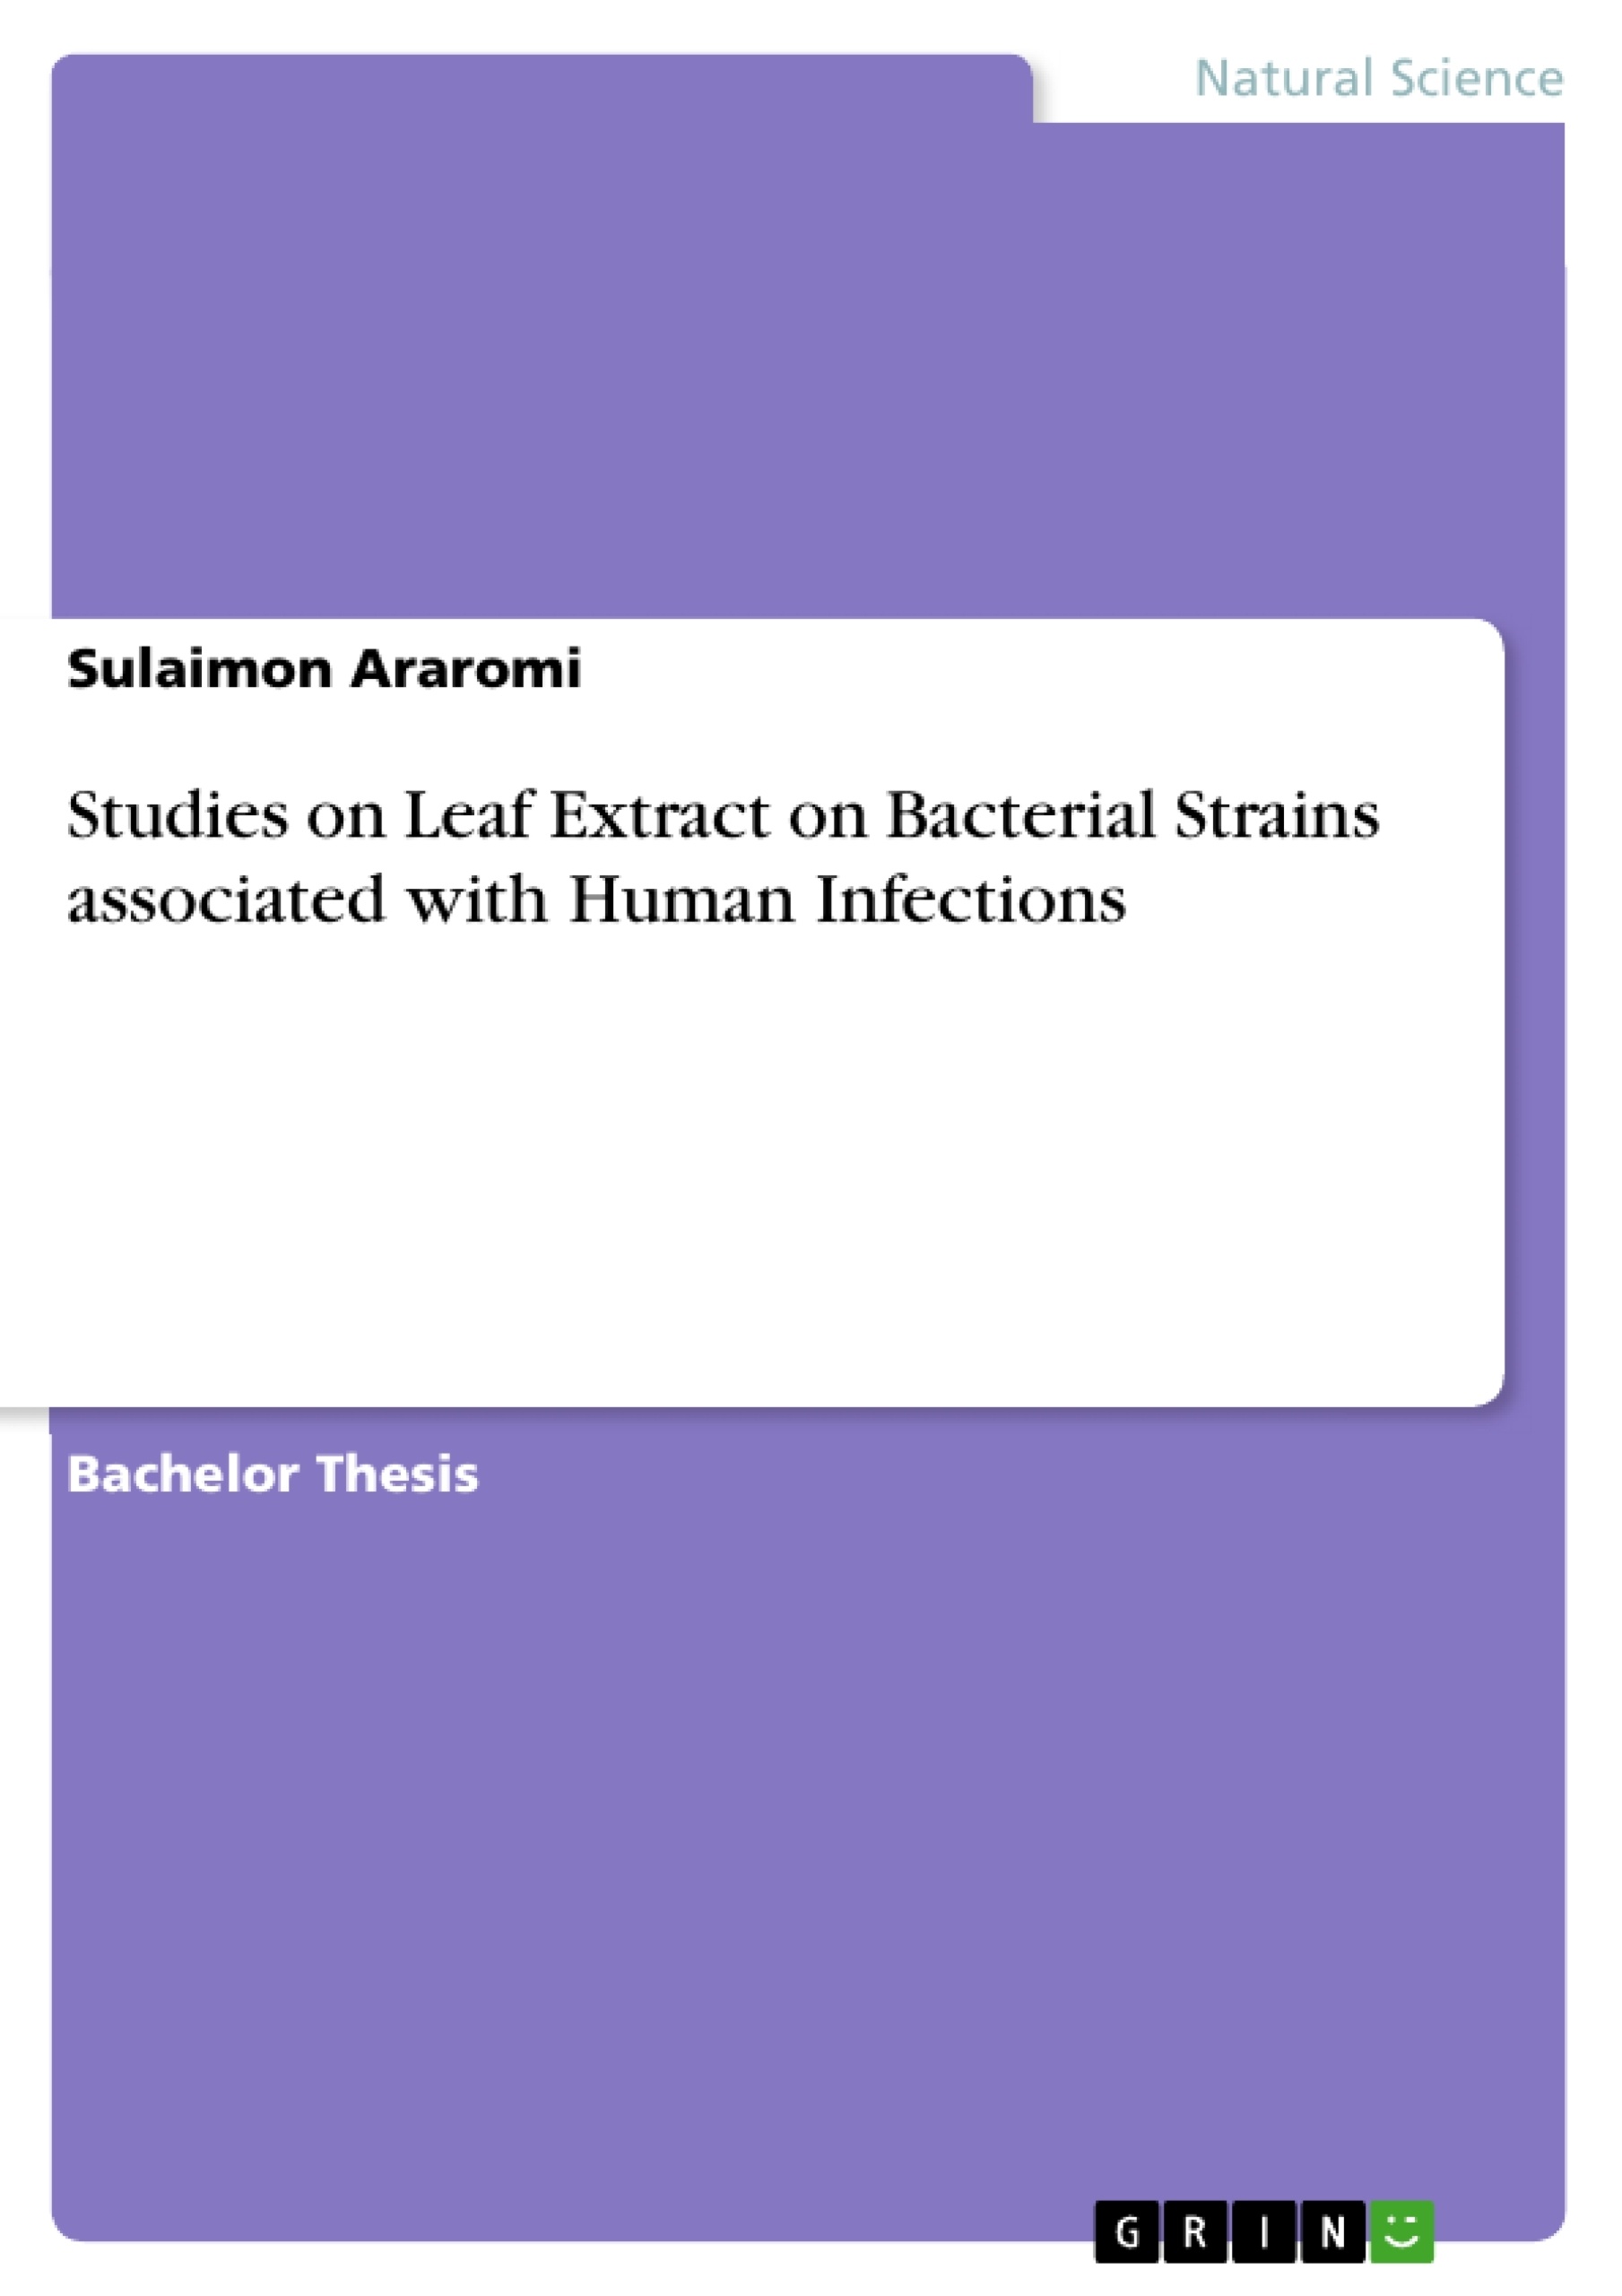 Titre: Studies on Leaf Extract on Bacterial Strains associated with Human Infections